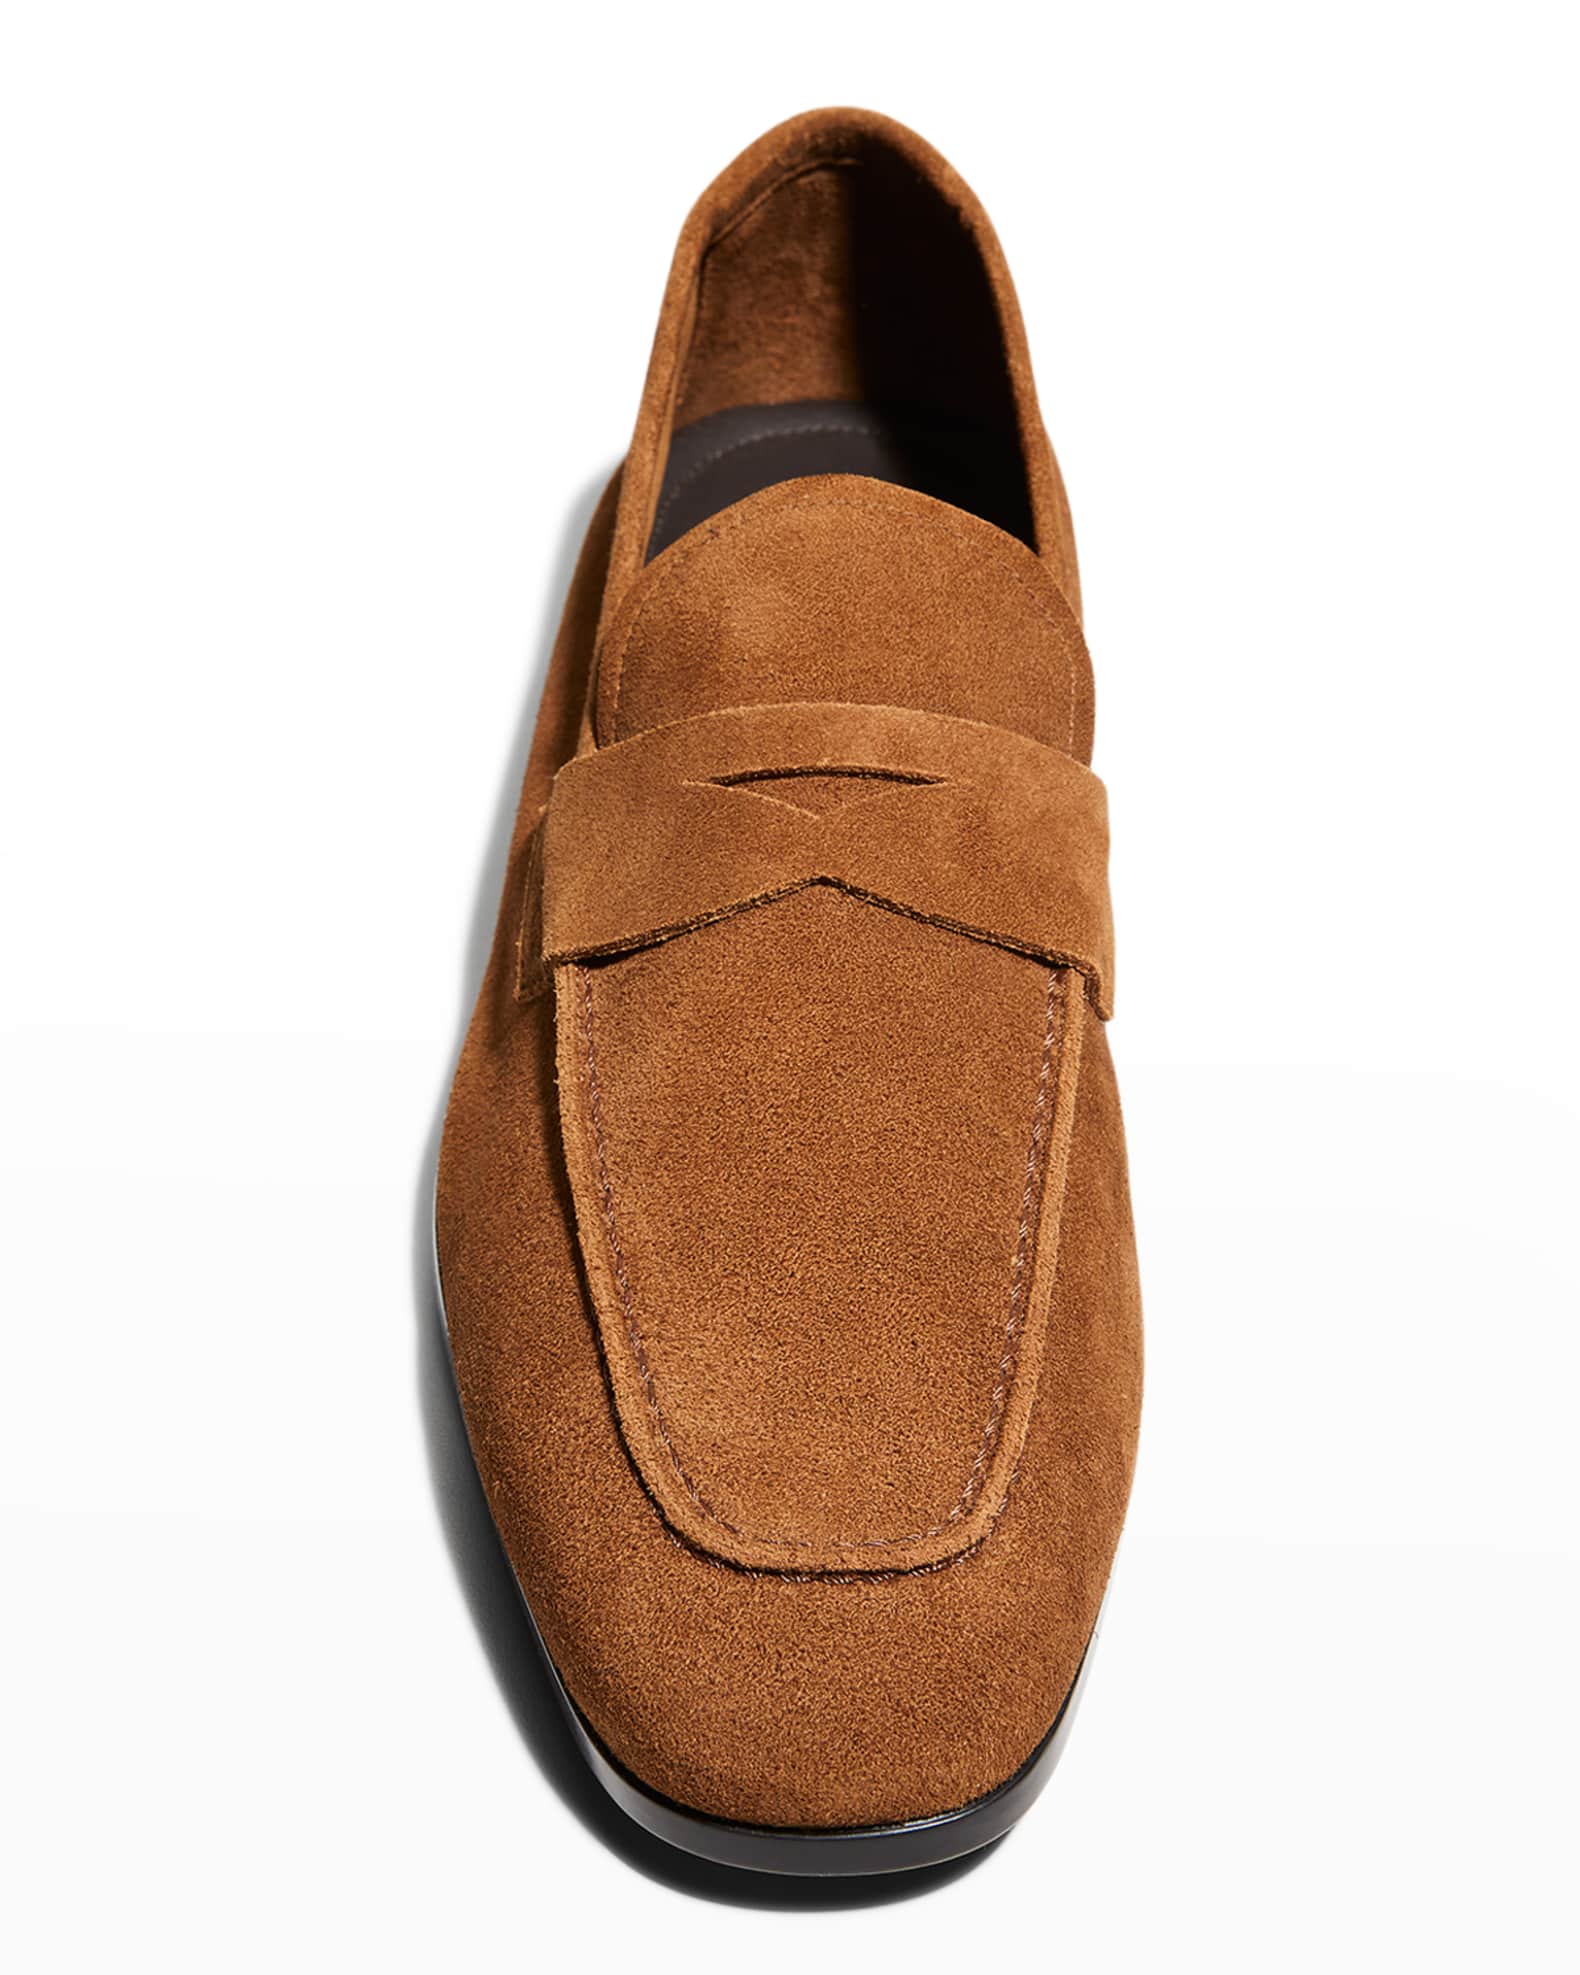 TOM FORD Men's Suede Penny Loafers | Neiman Marcus